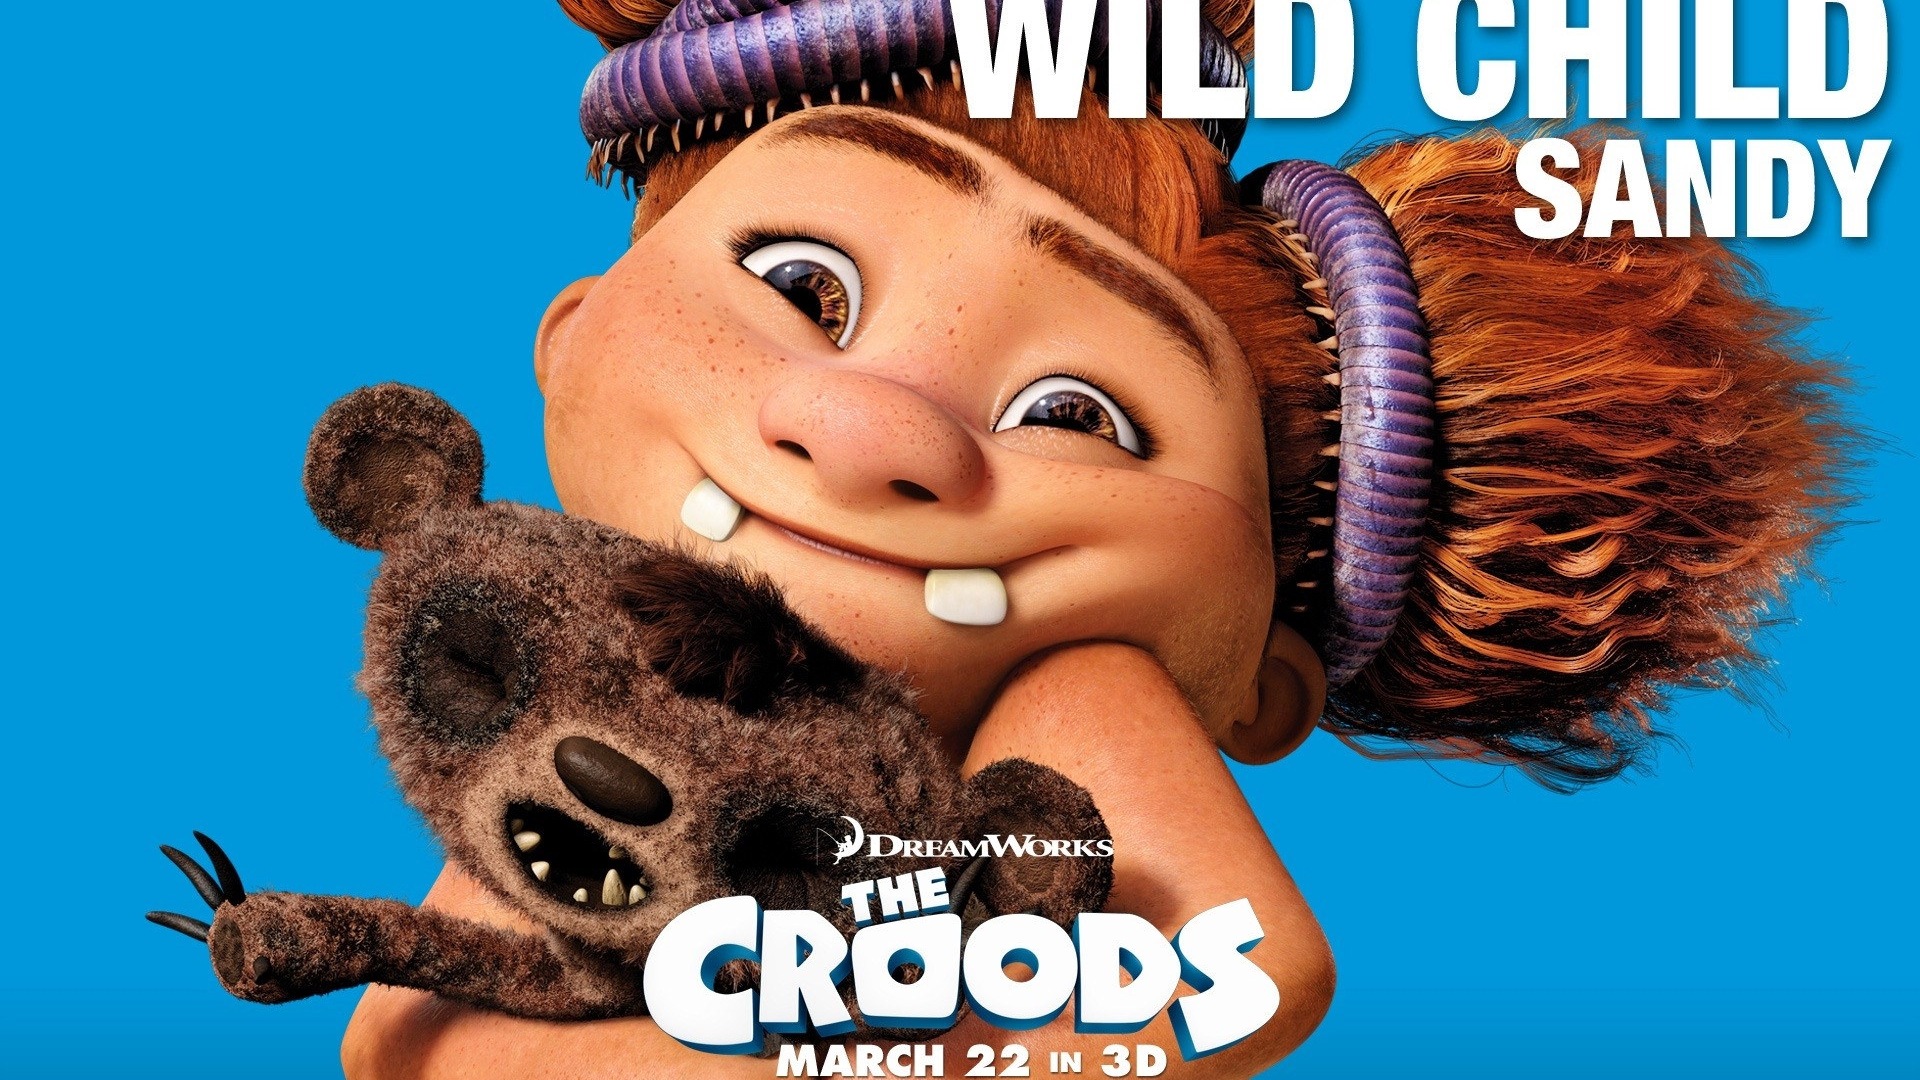 V Croods HD Movie Wallpapers #9 - 1920x1080